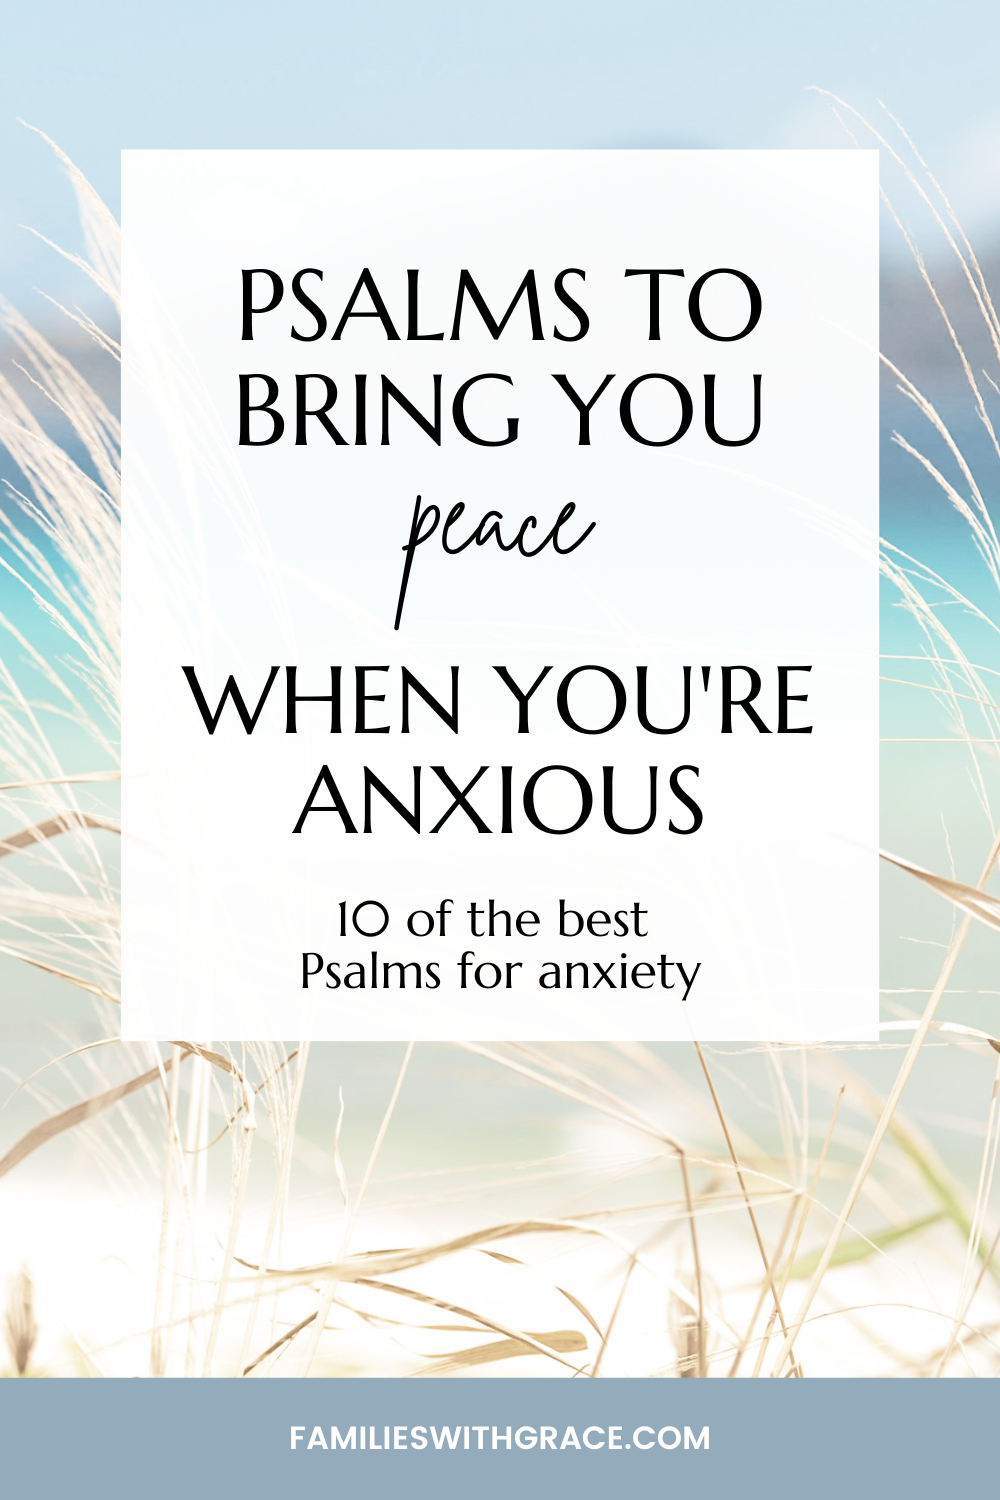 The best Psalms for anxiety